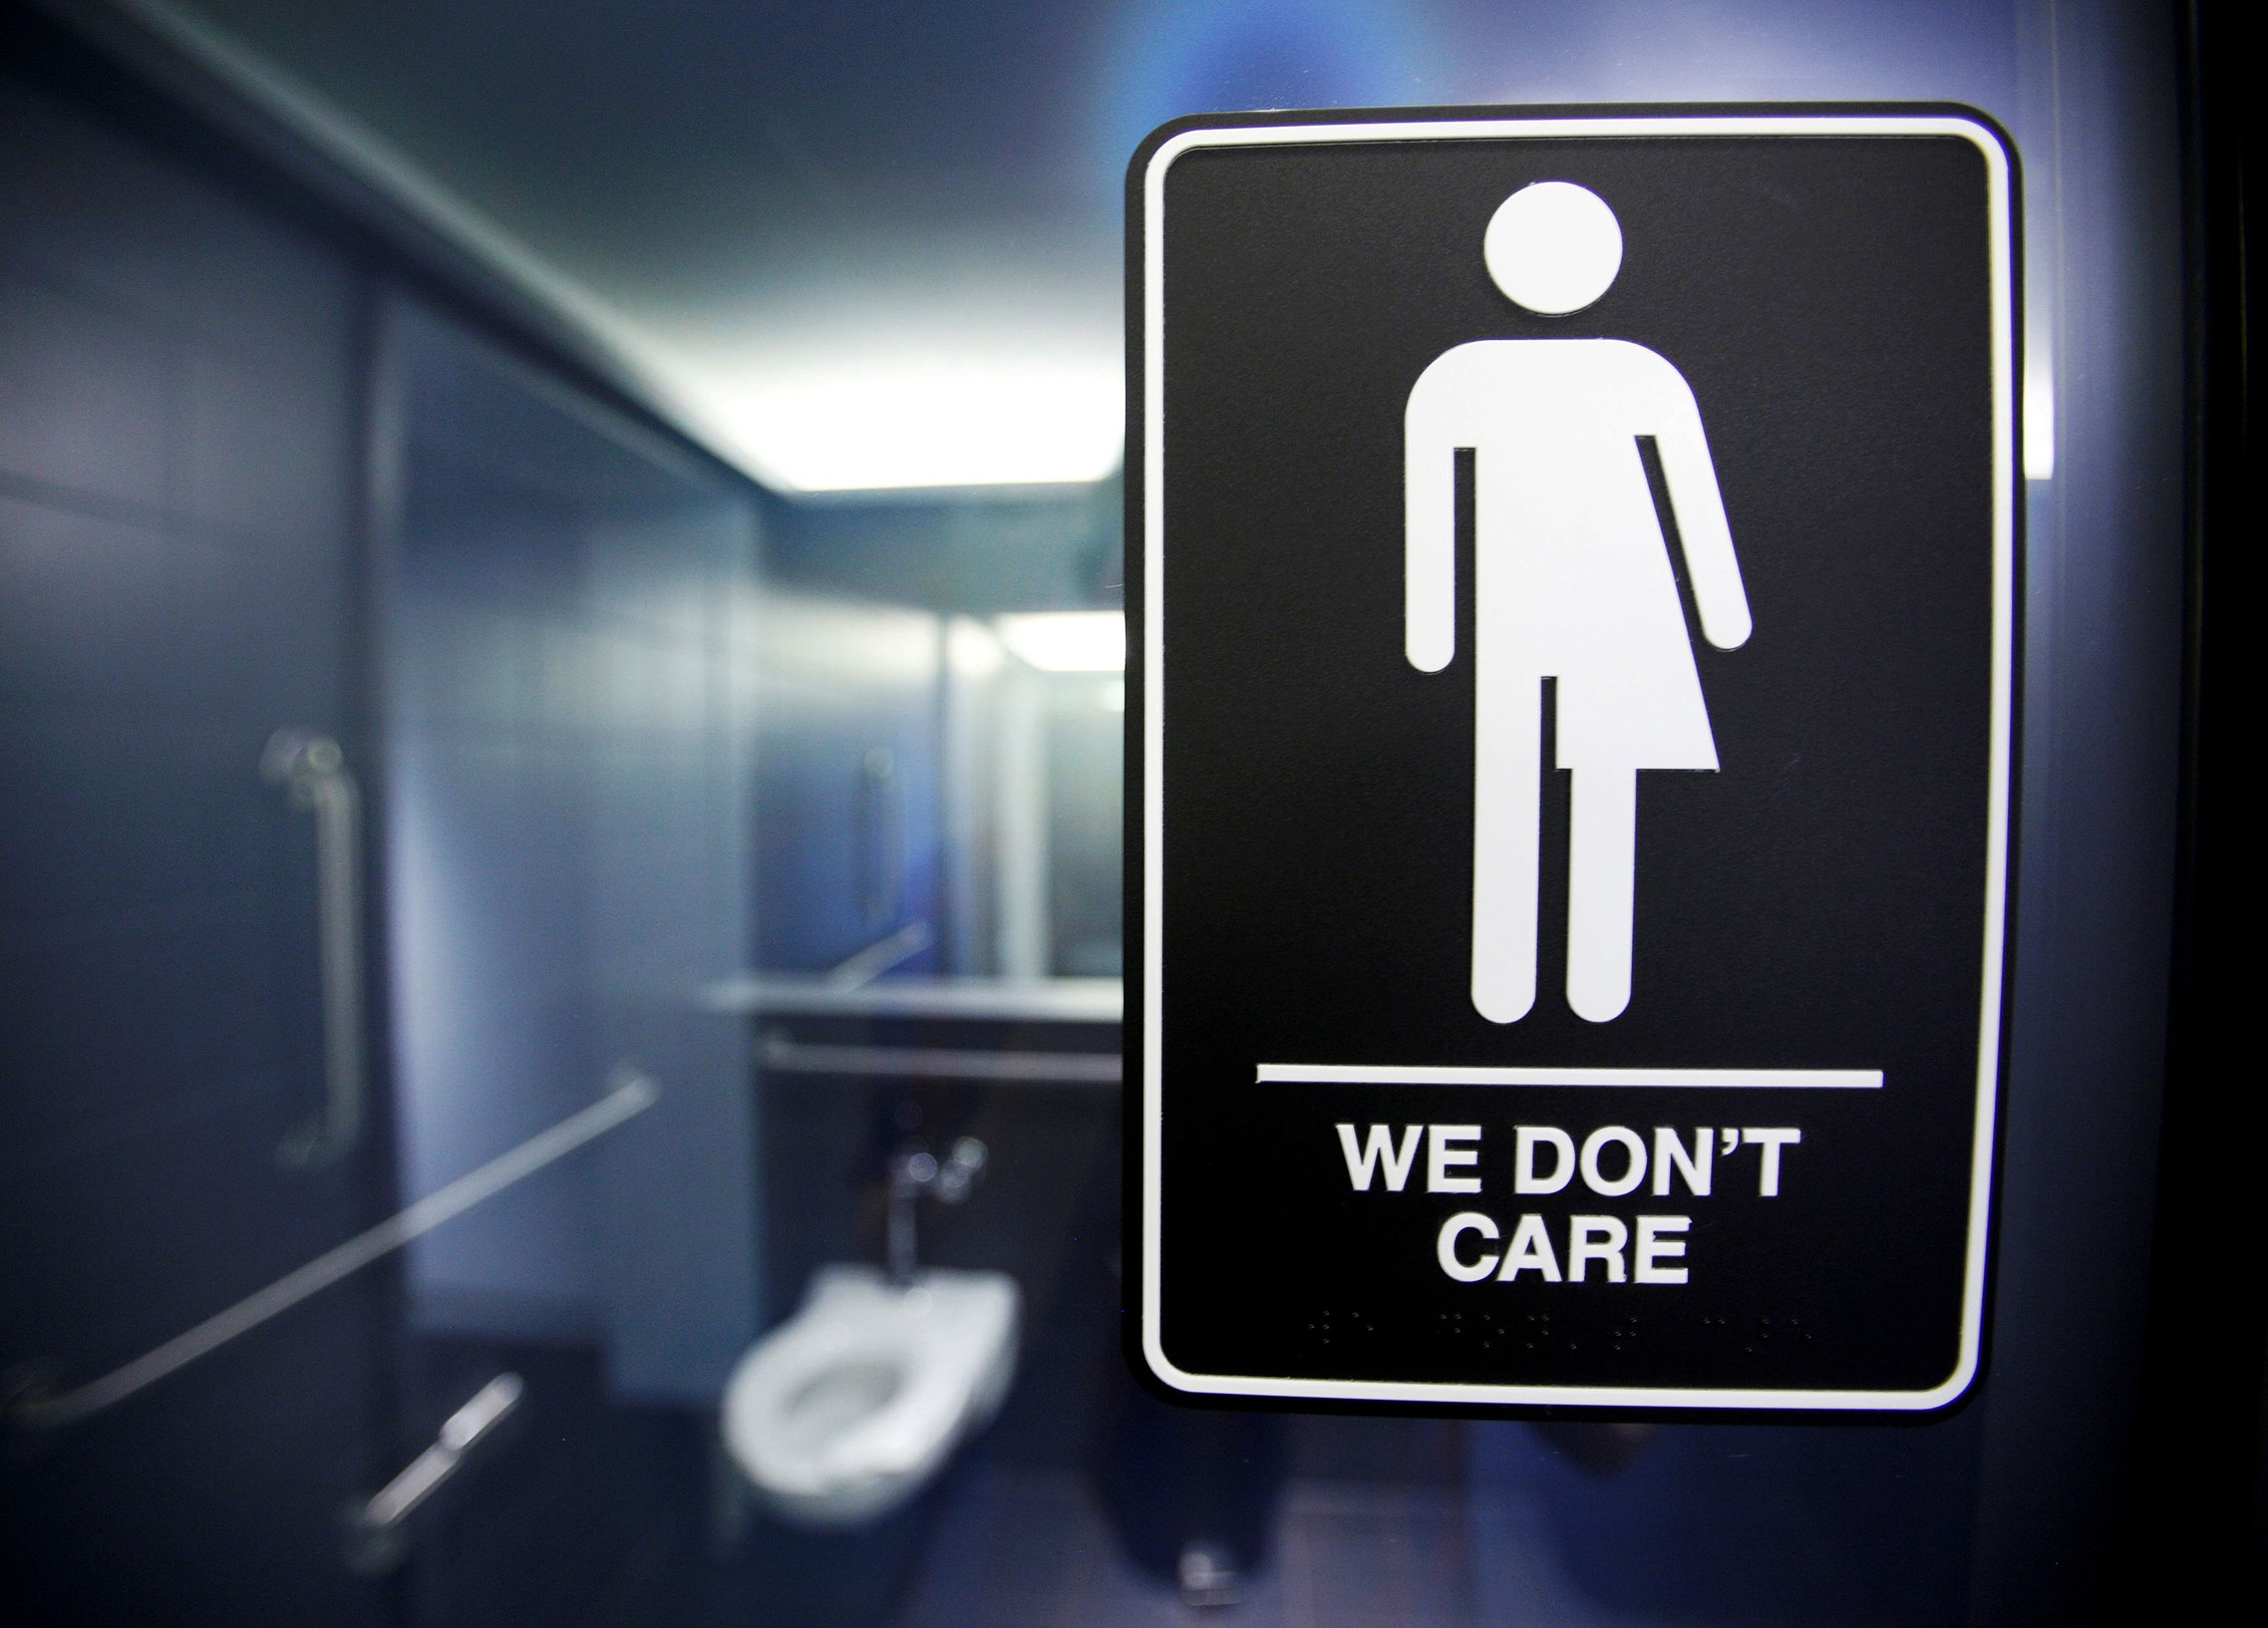 Neutral bathroom signs in public facilities indicate to patrons they are free to pee, regardless of their gender